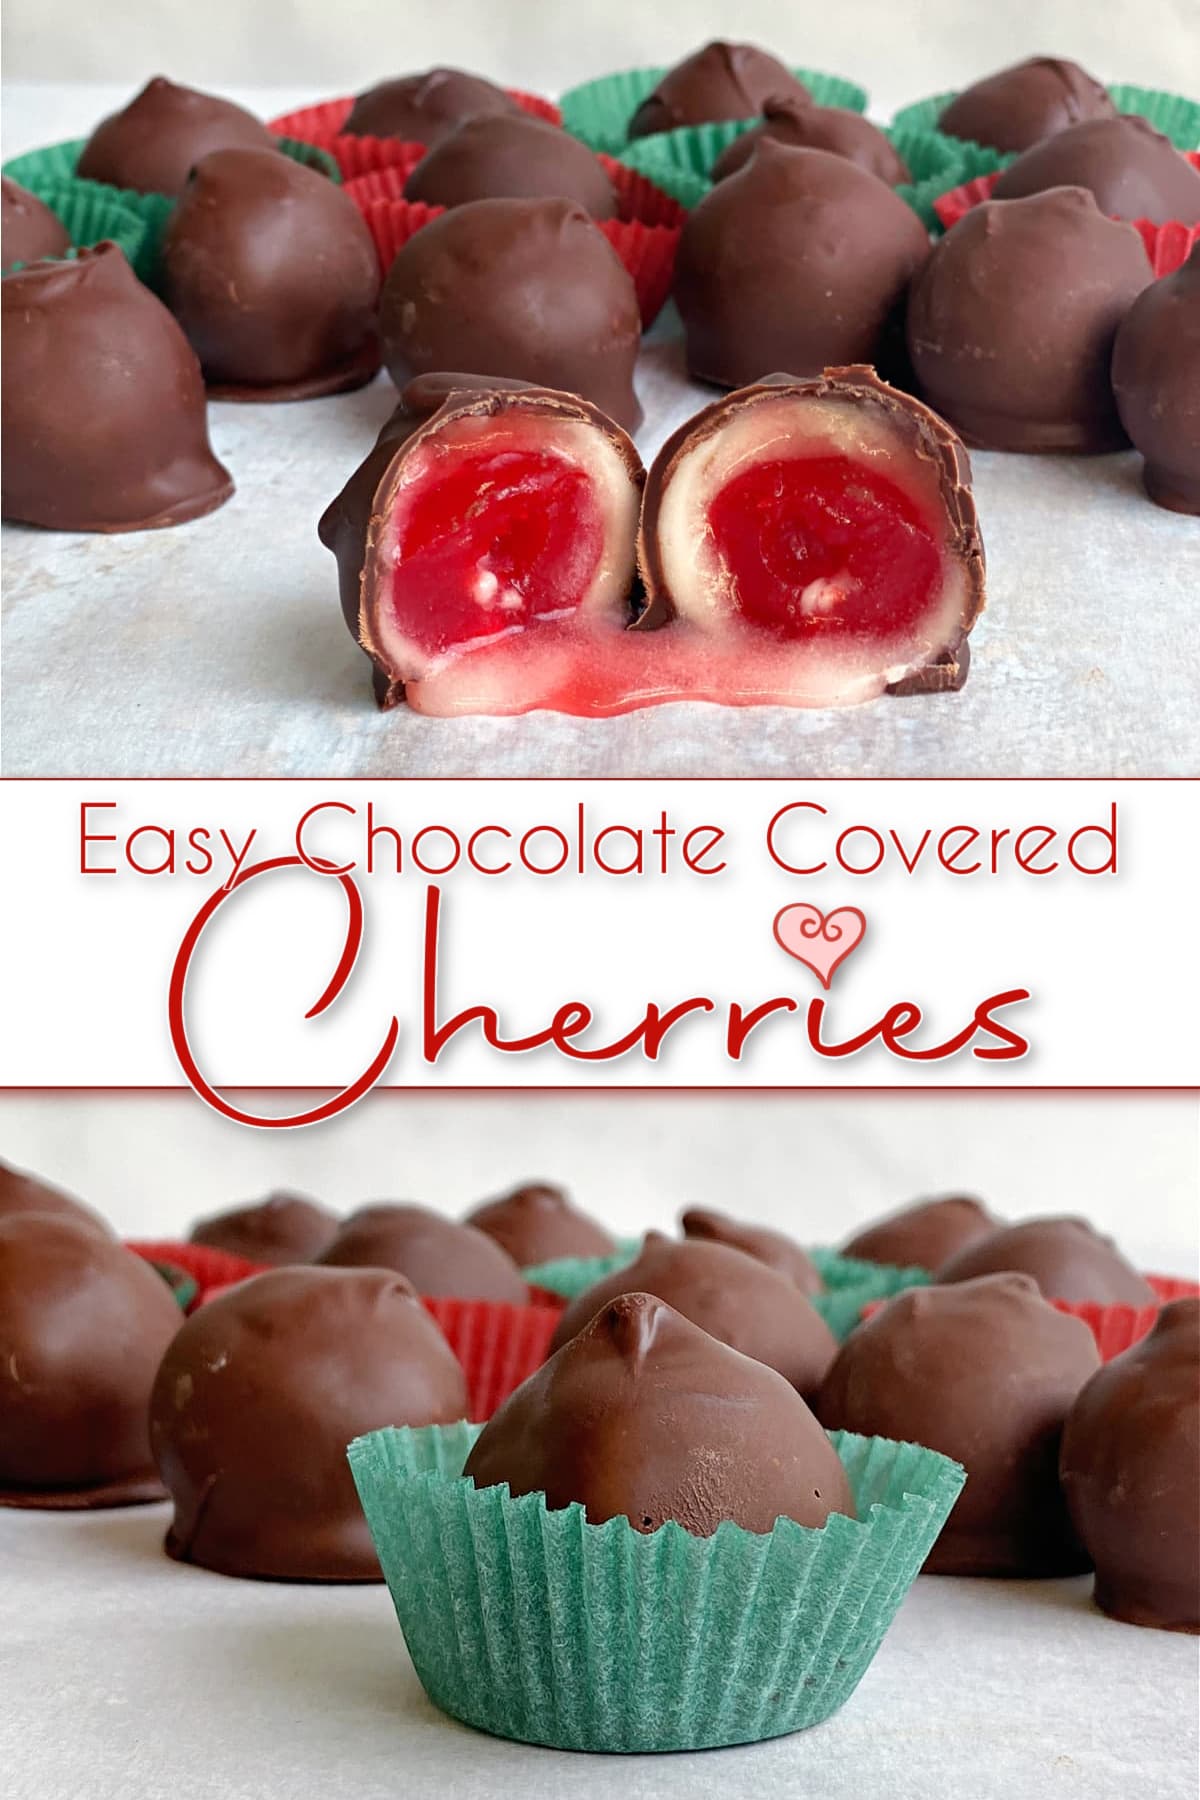 Chocolate covered cherry cut in half and opened on parchment. Pin overlay reads: Easy Chocolate Covered Cherries